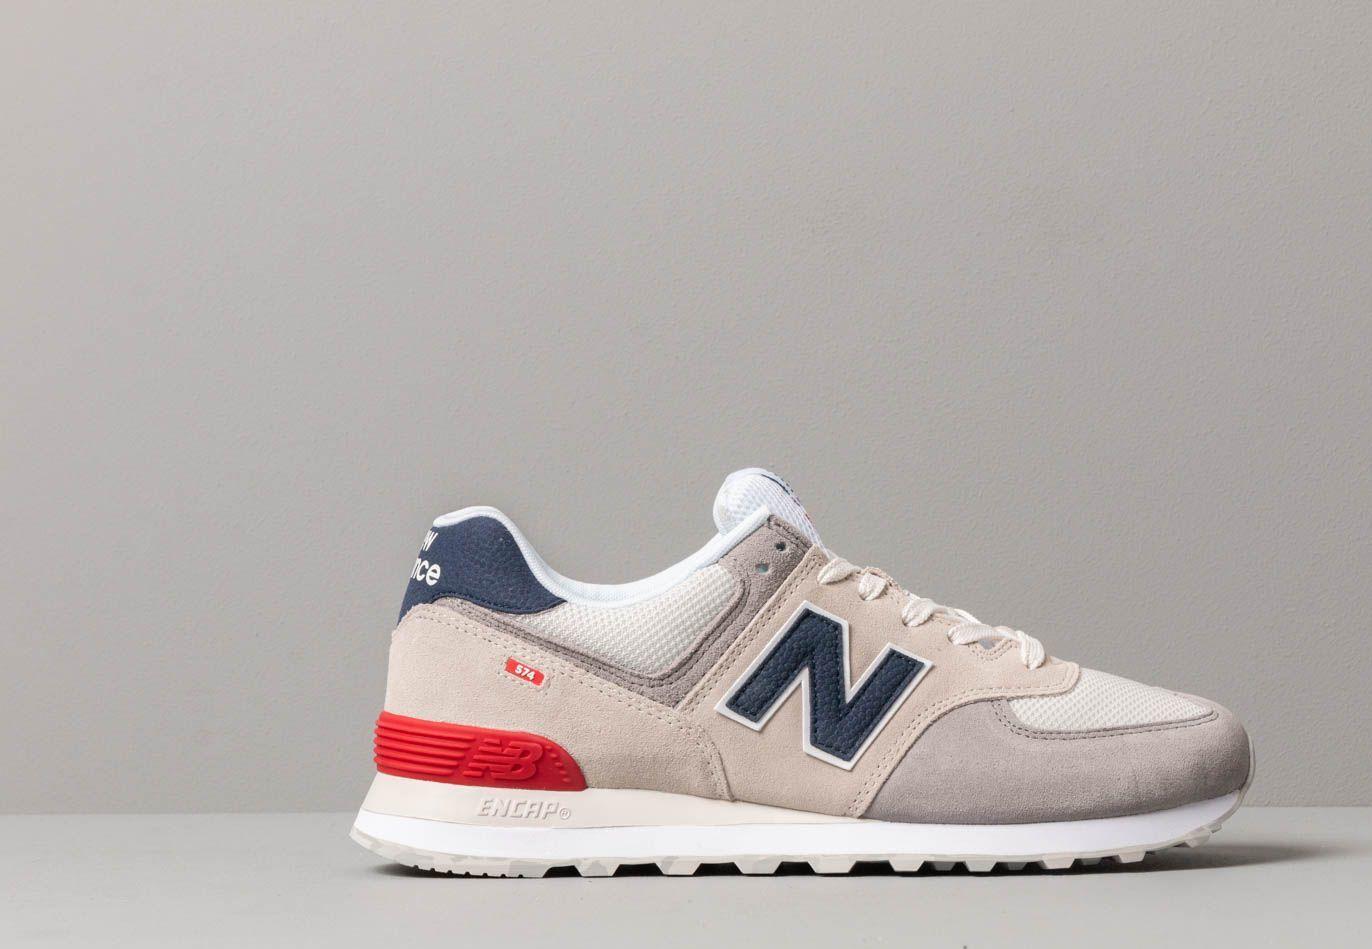 New Balance 574 Grey/ Blue/ Red in Gray for Men - Lyst